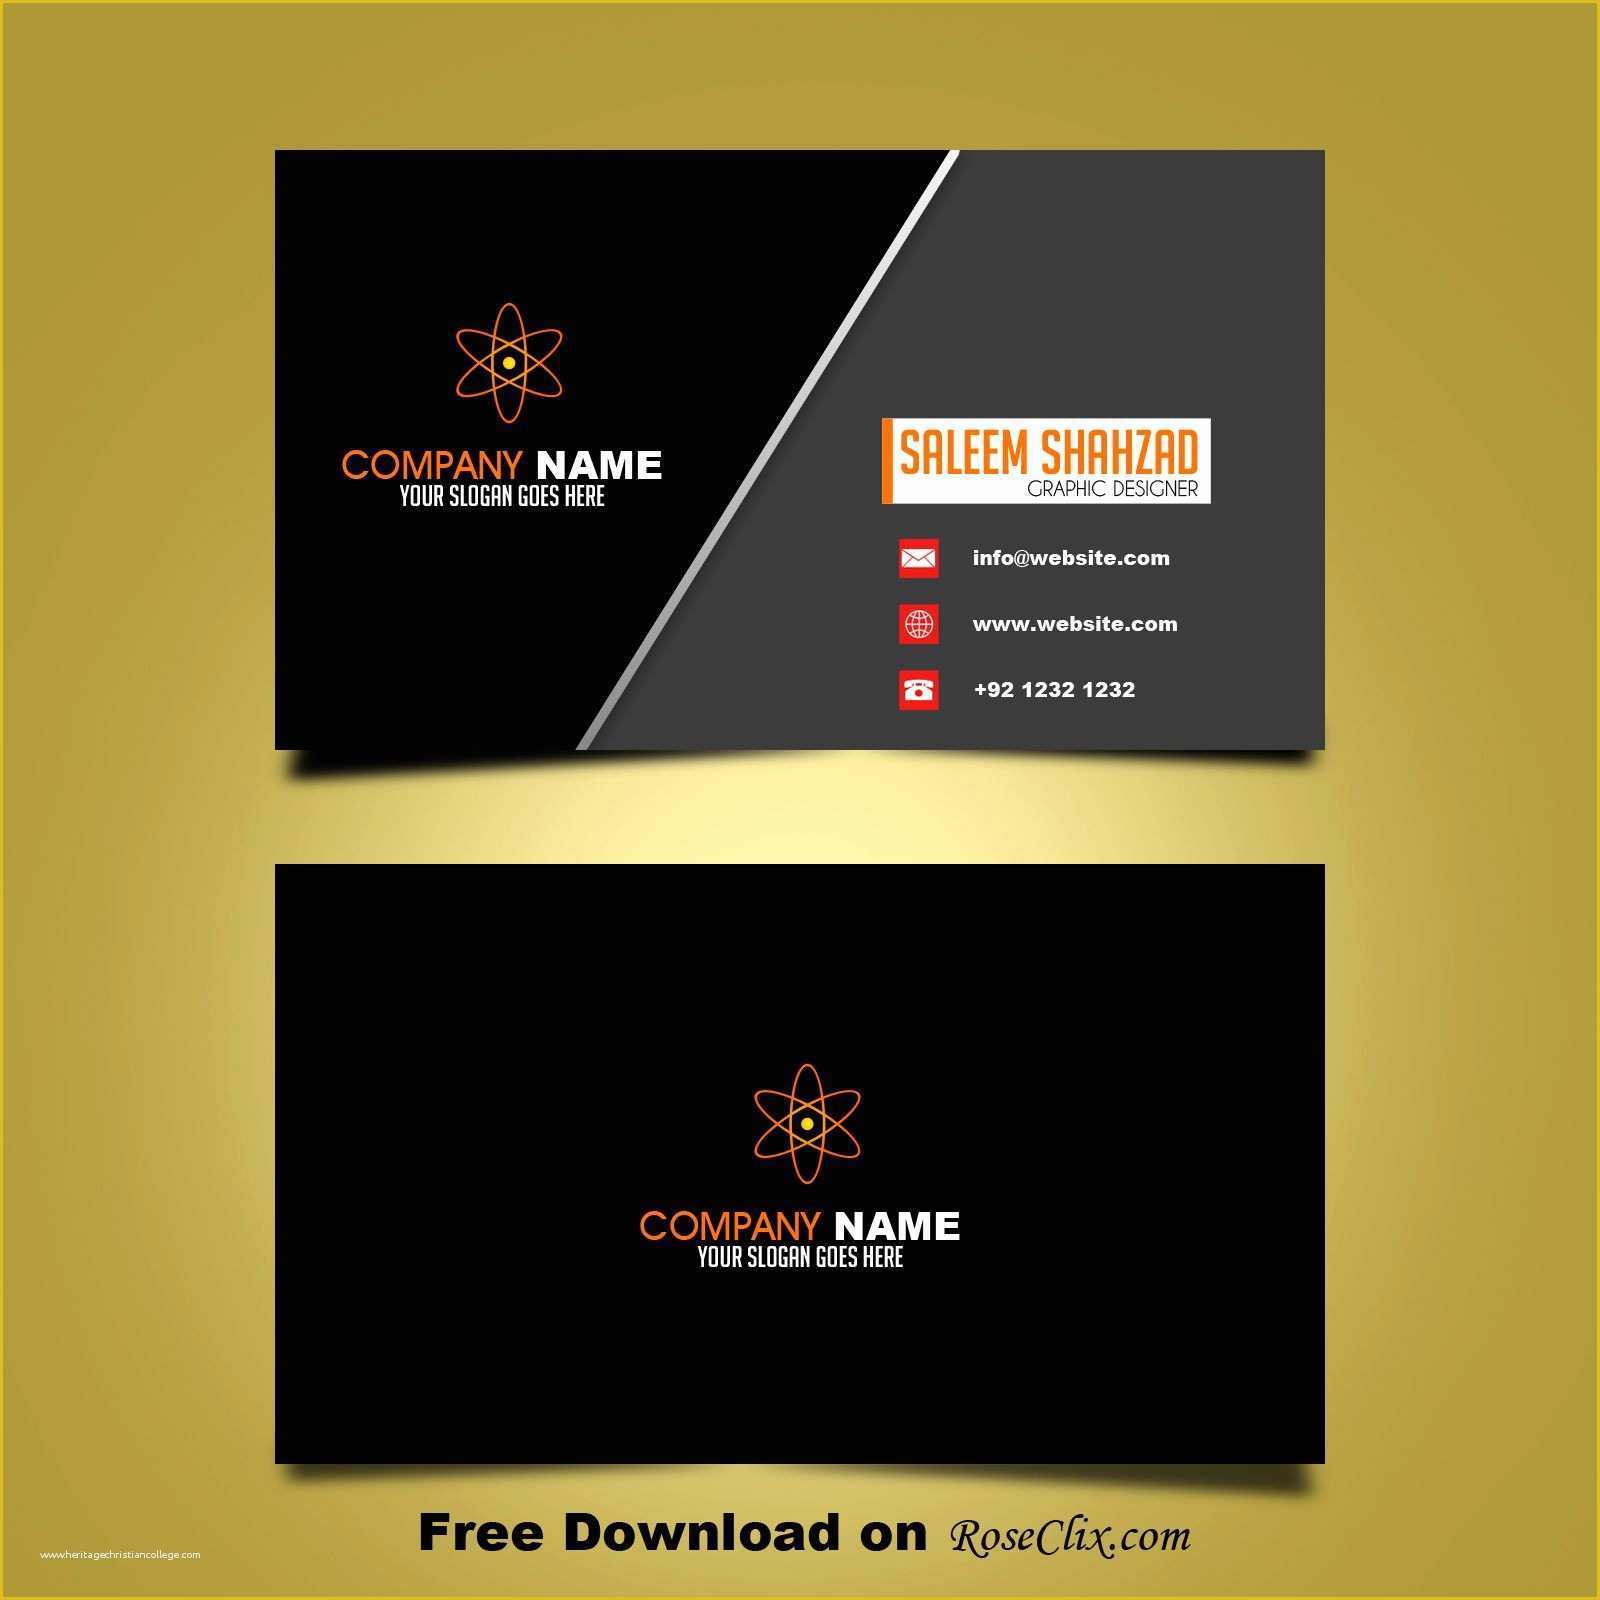 Www Free Business Card Templates Com Of Free Business Card Design Template Vector Shapes Psd